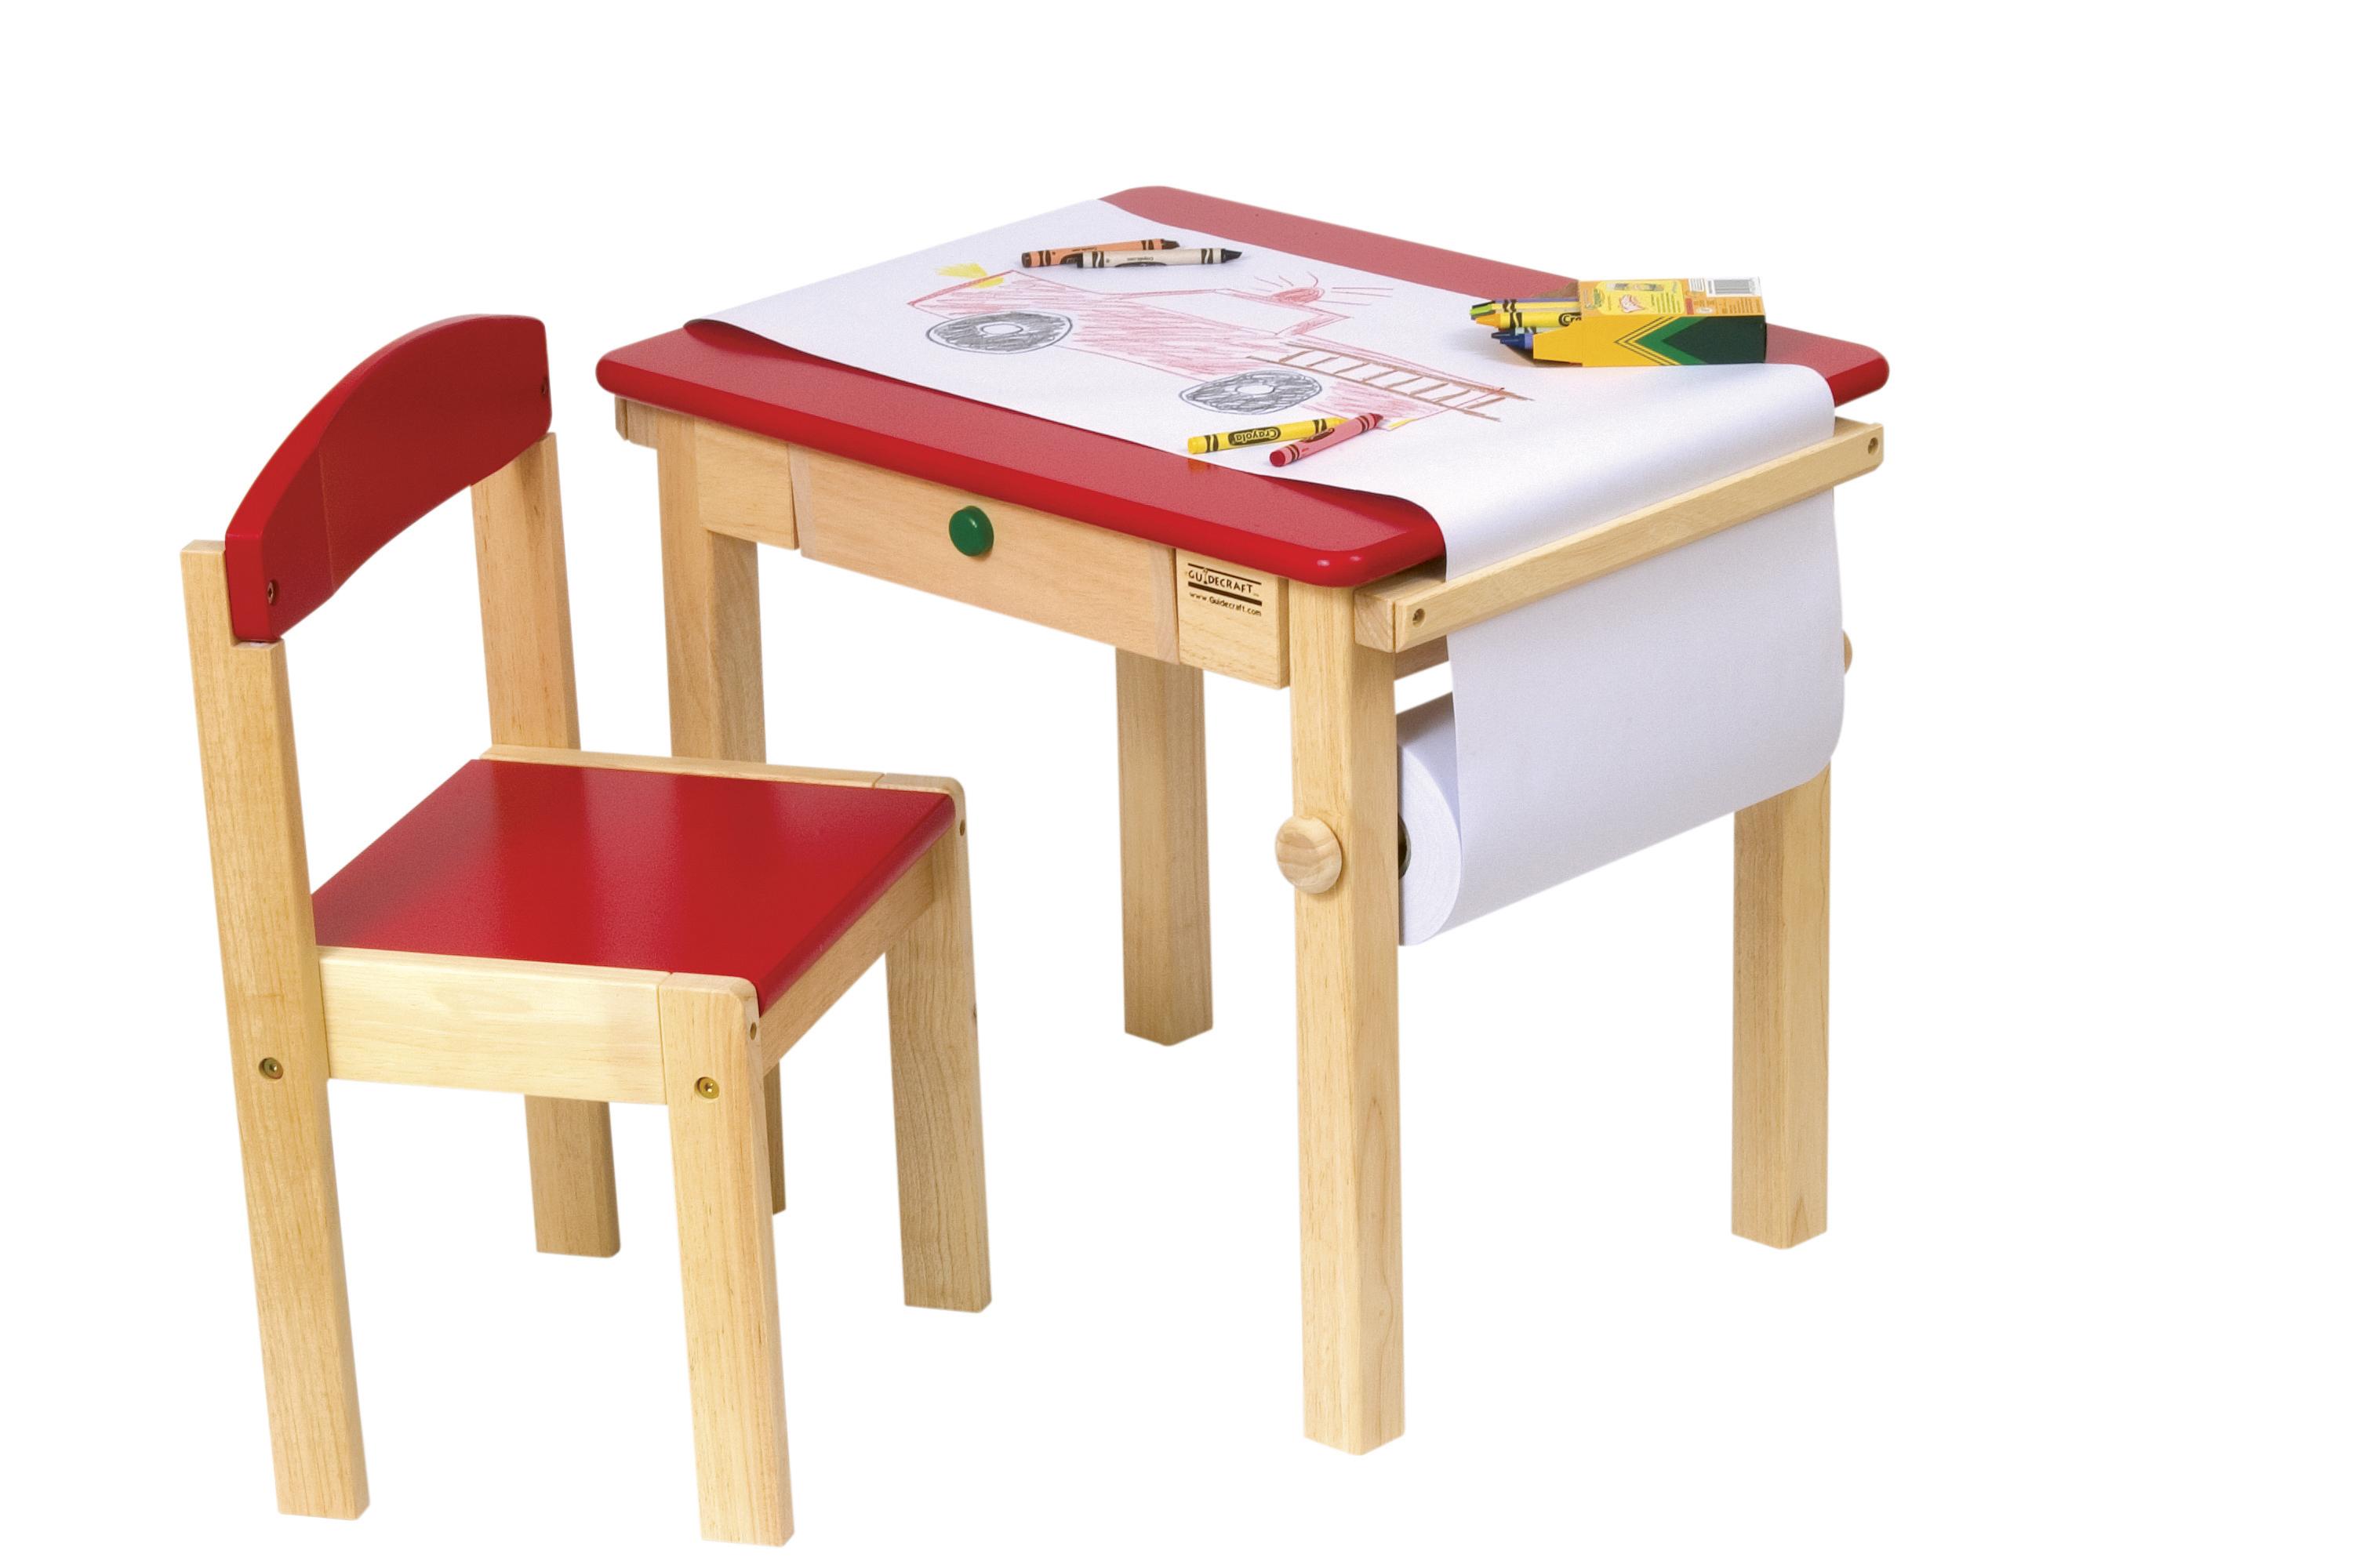 toddlers chair and table set